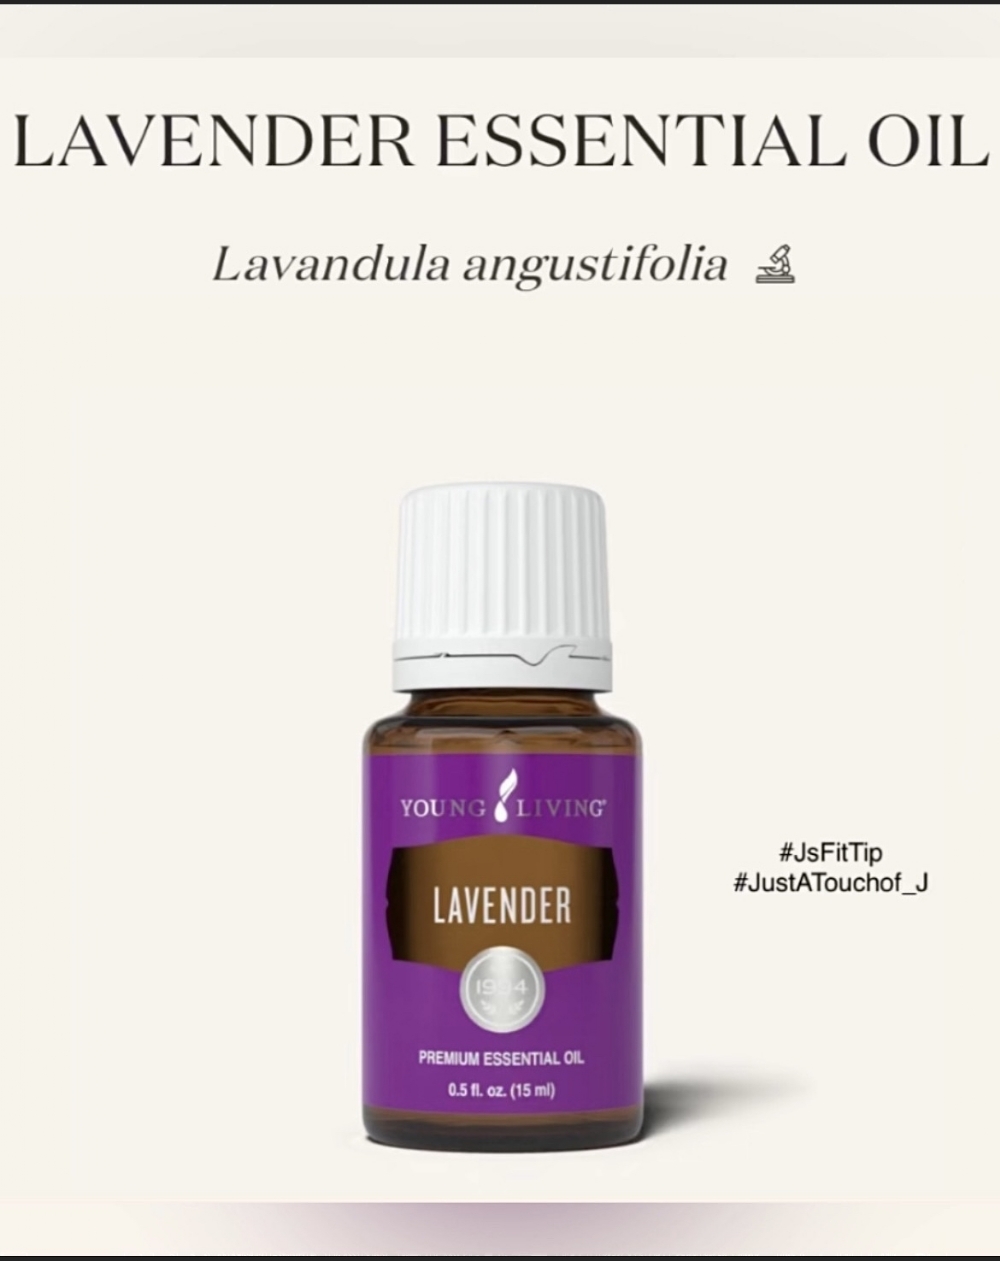 It's Time For #JsFitTips Of The Week! Let's Talk About The Lavender Essential Oil.